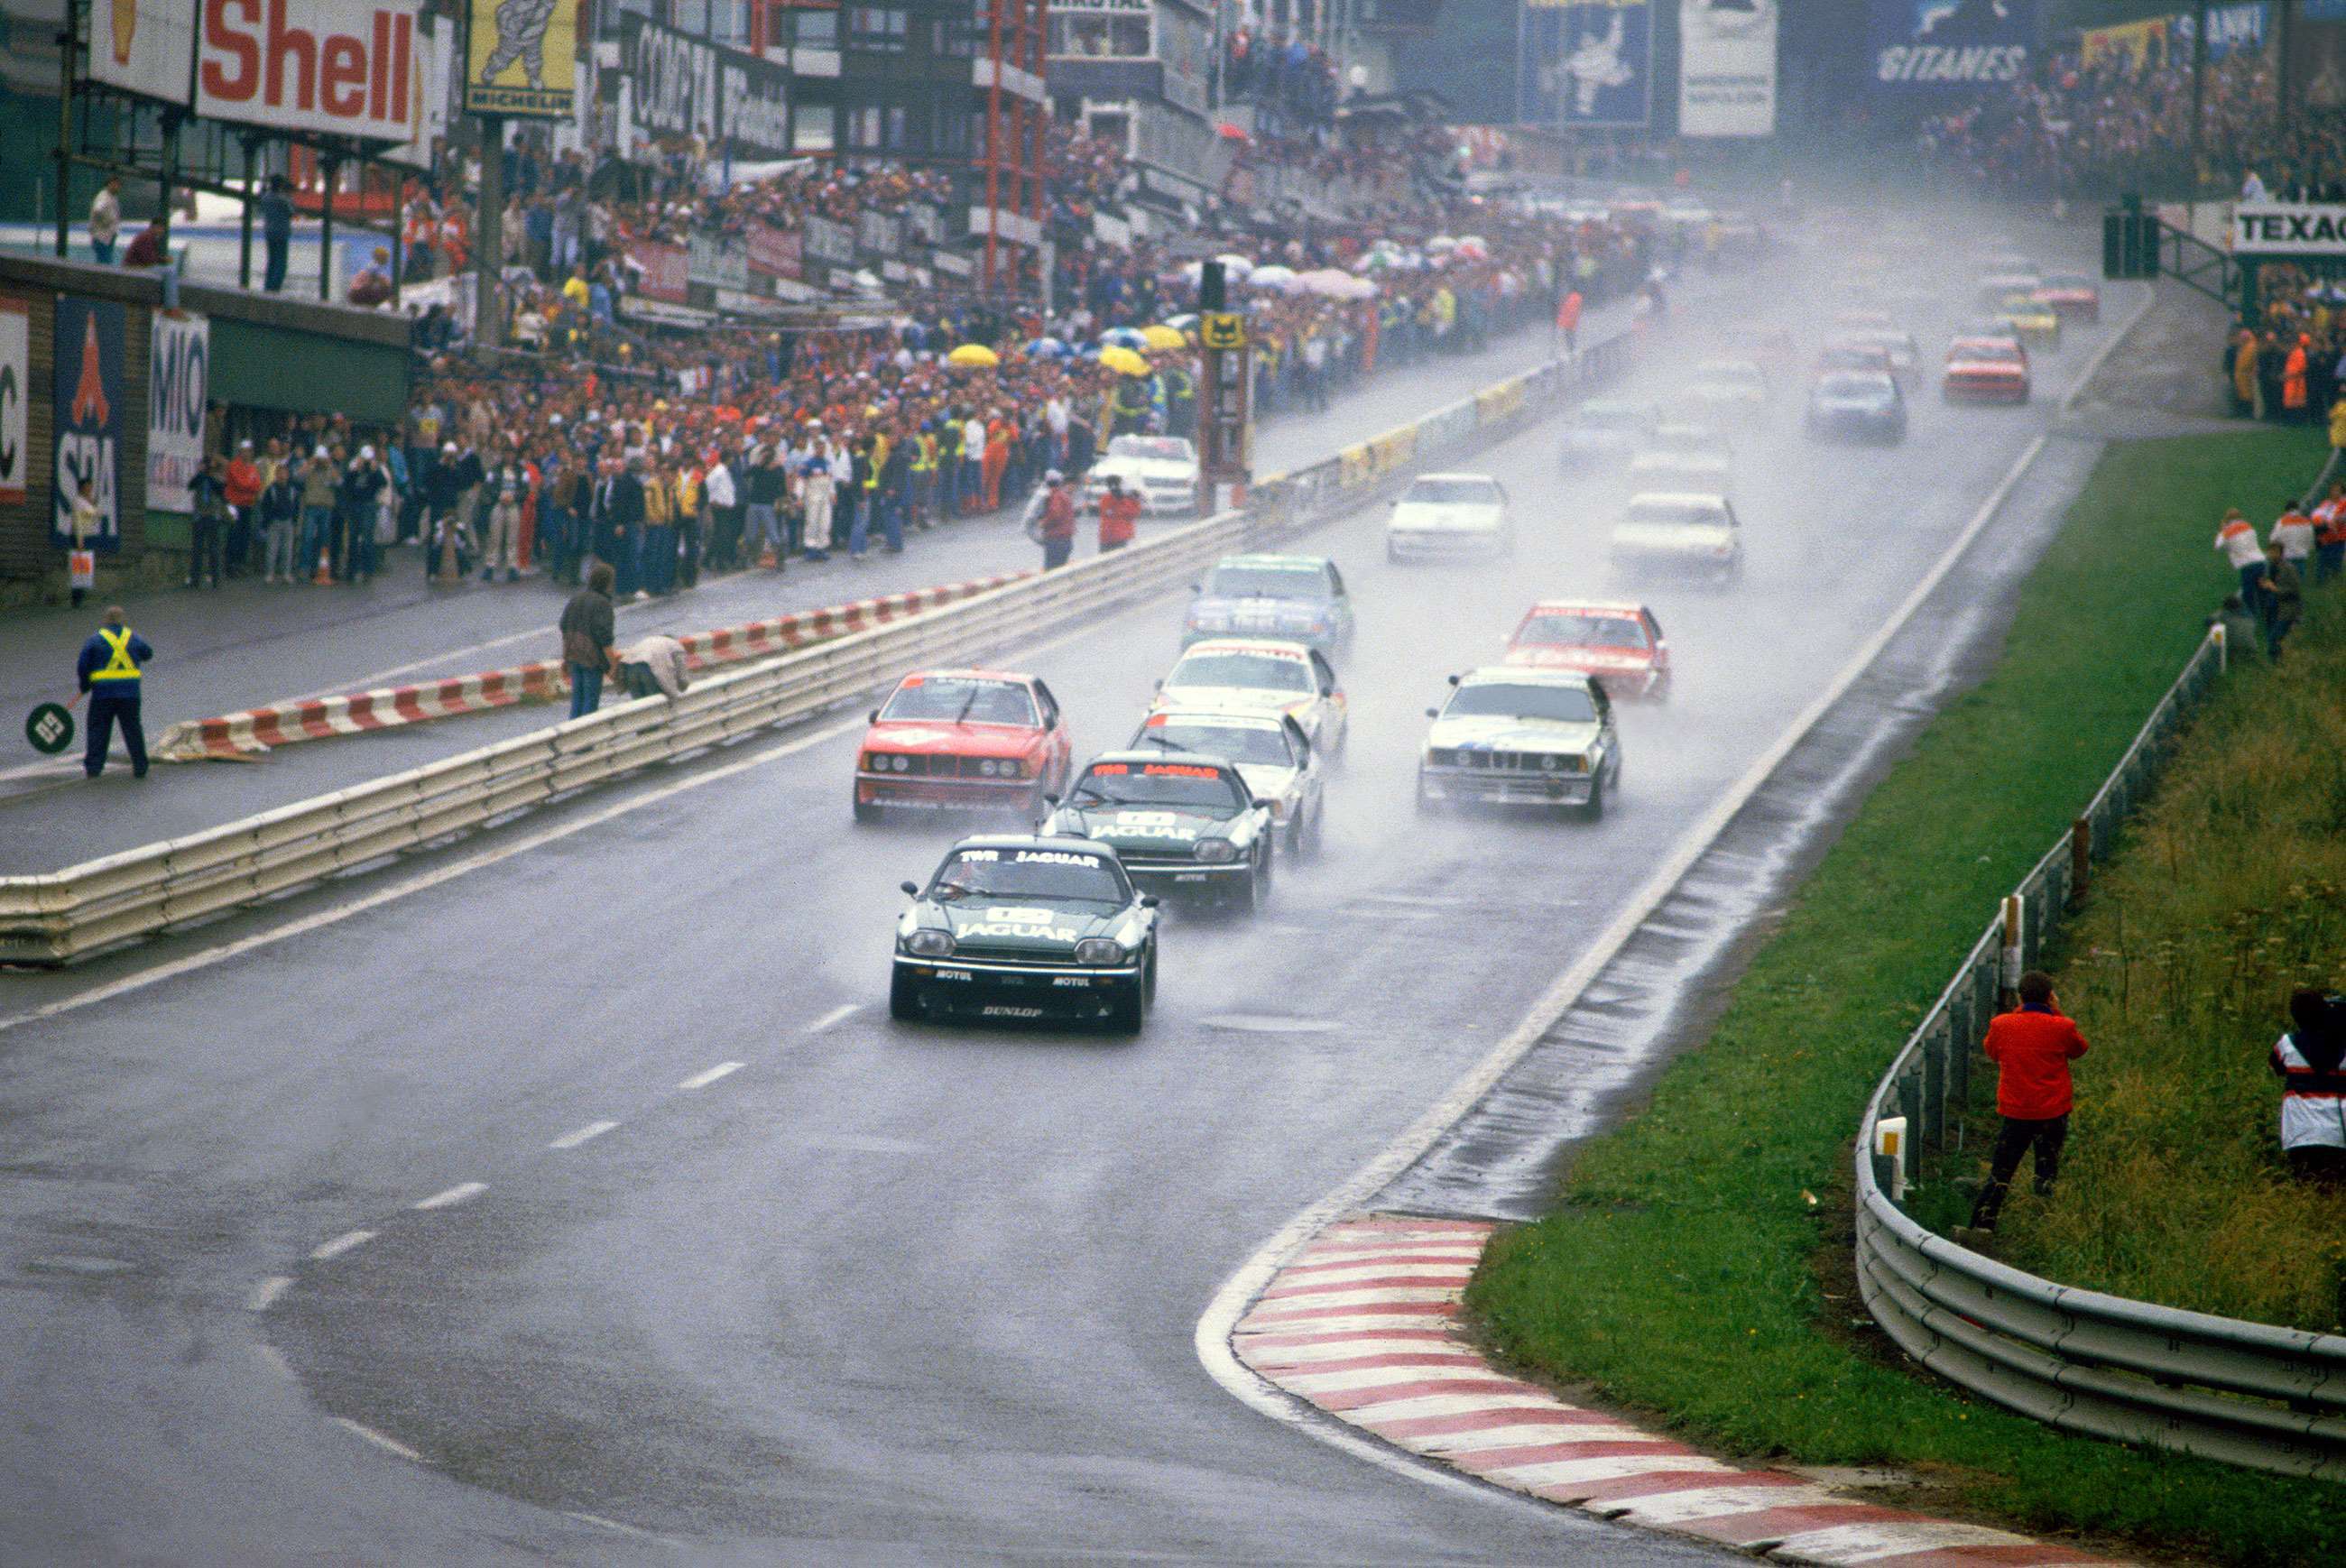 Spa 1984. The TWR Jaguar XJ-S of Tom Walkinshaw, Win Percy and Hans Heyer storms into Eau Rouge in first position. 